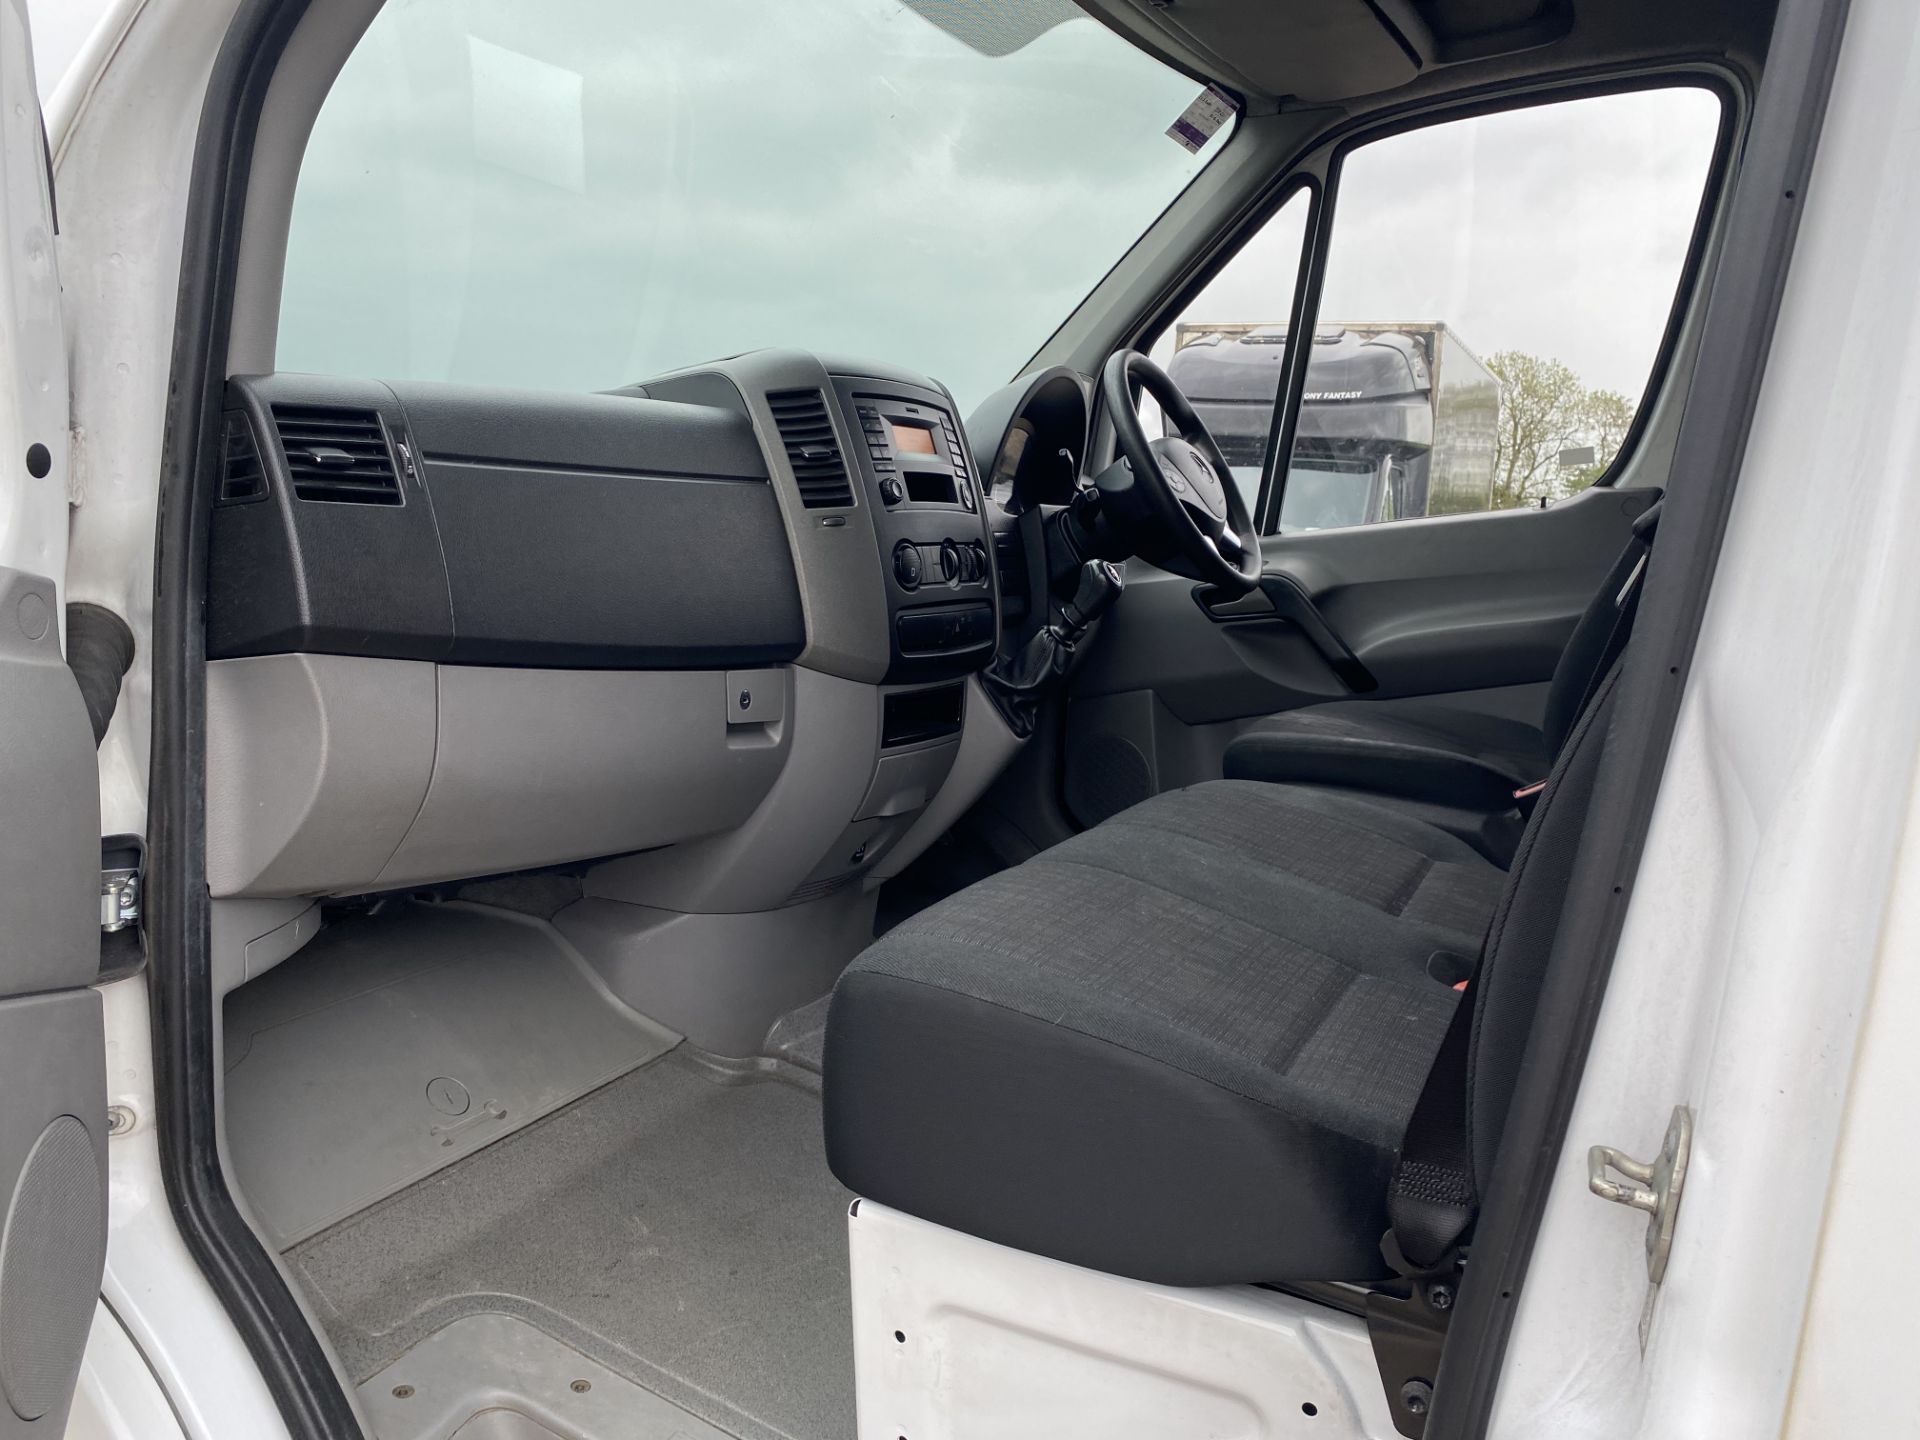 MERCEDES SPRINTER 314CDI "LWB" HIGH ROOF WITH FULL ELECTRIC TAIL-LIFT - 2018 MODEL - 1 OWNER - FSH - Image 9 of 18